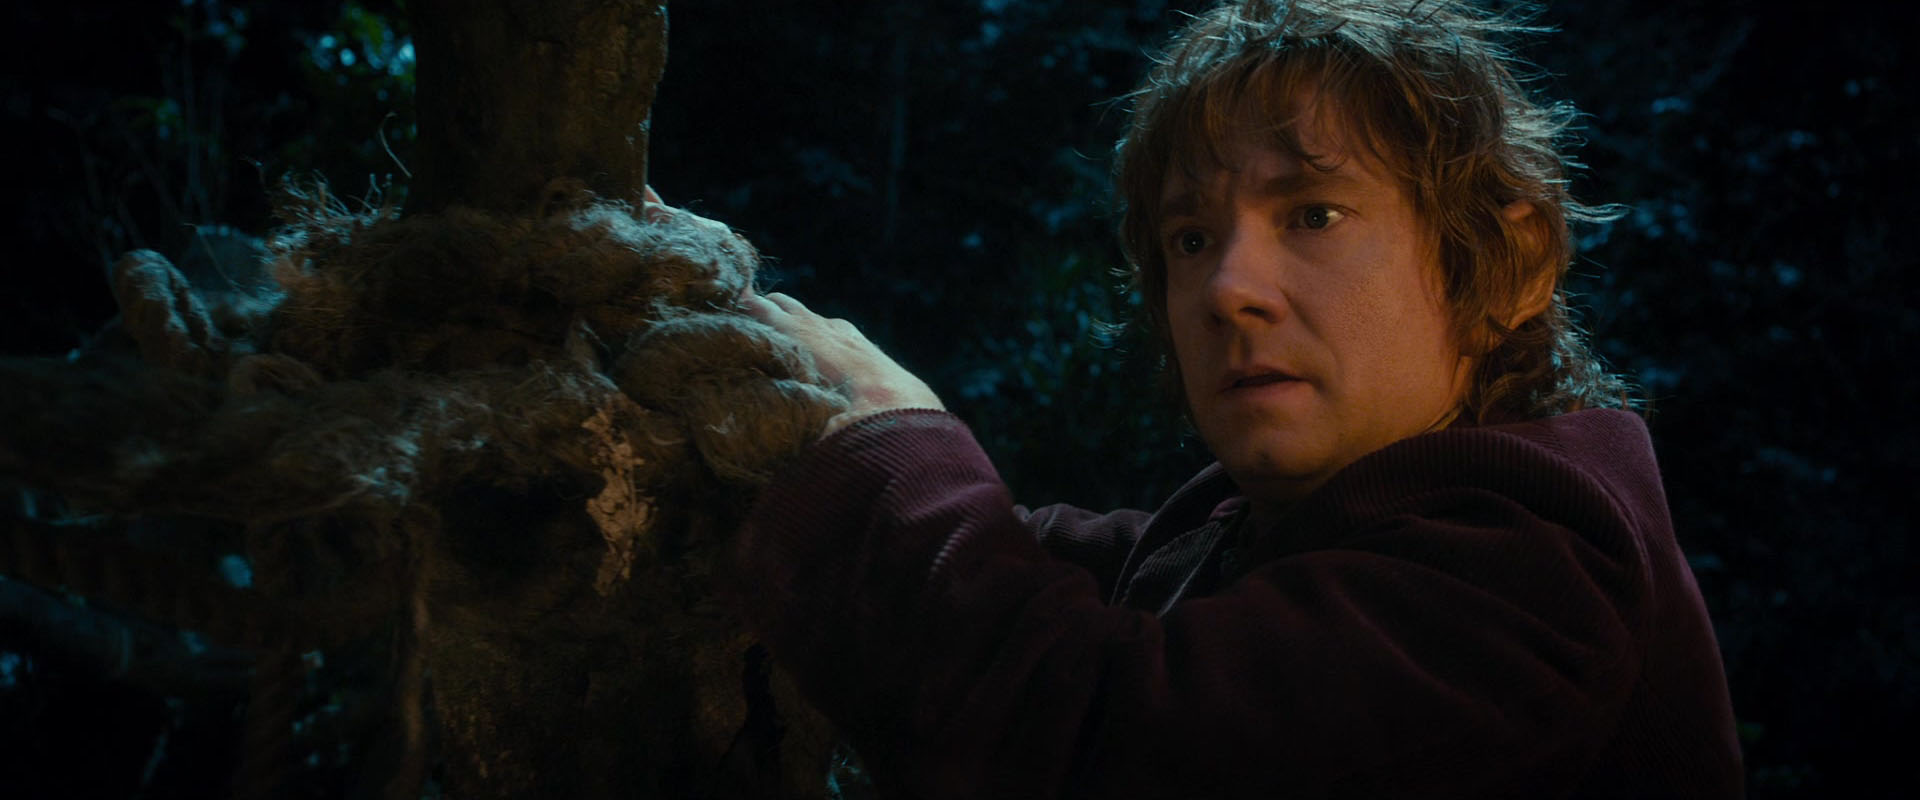 The Hobbit An Unexpected Journey (2012) 